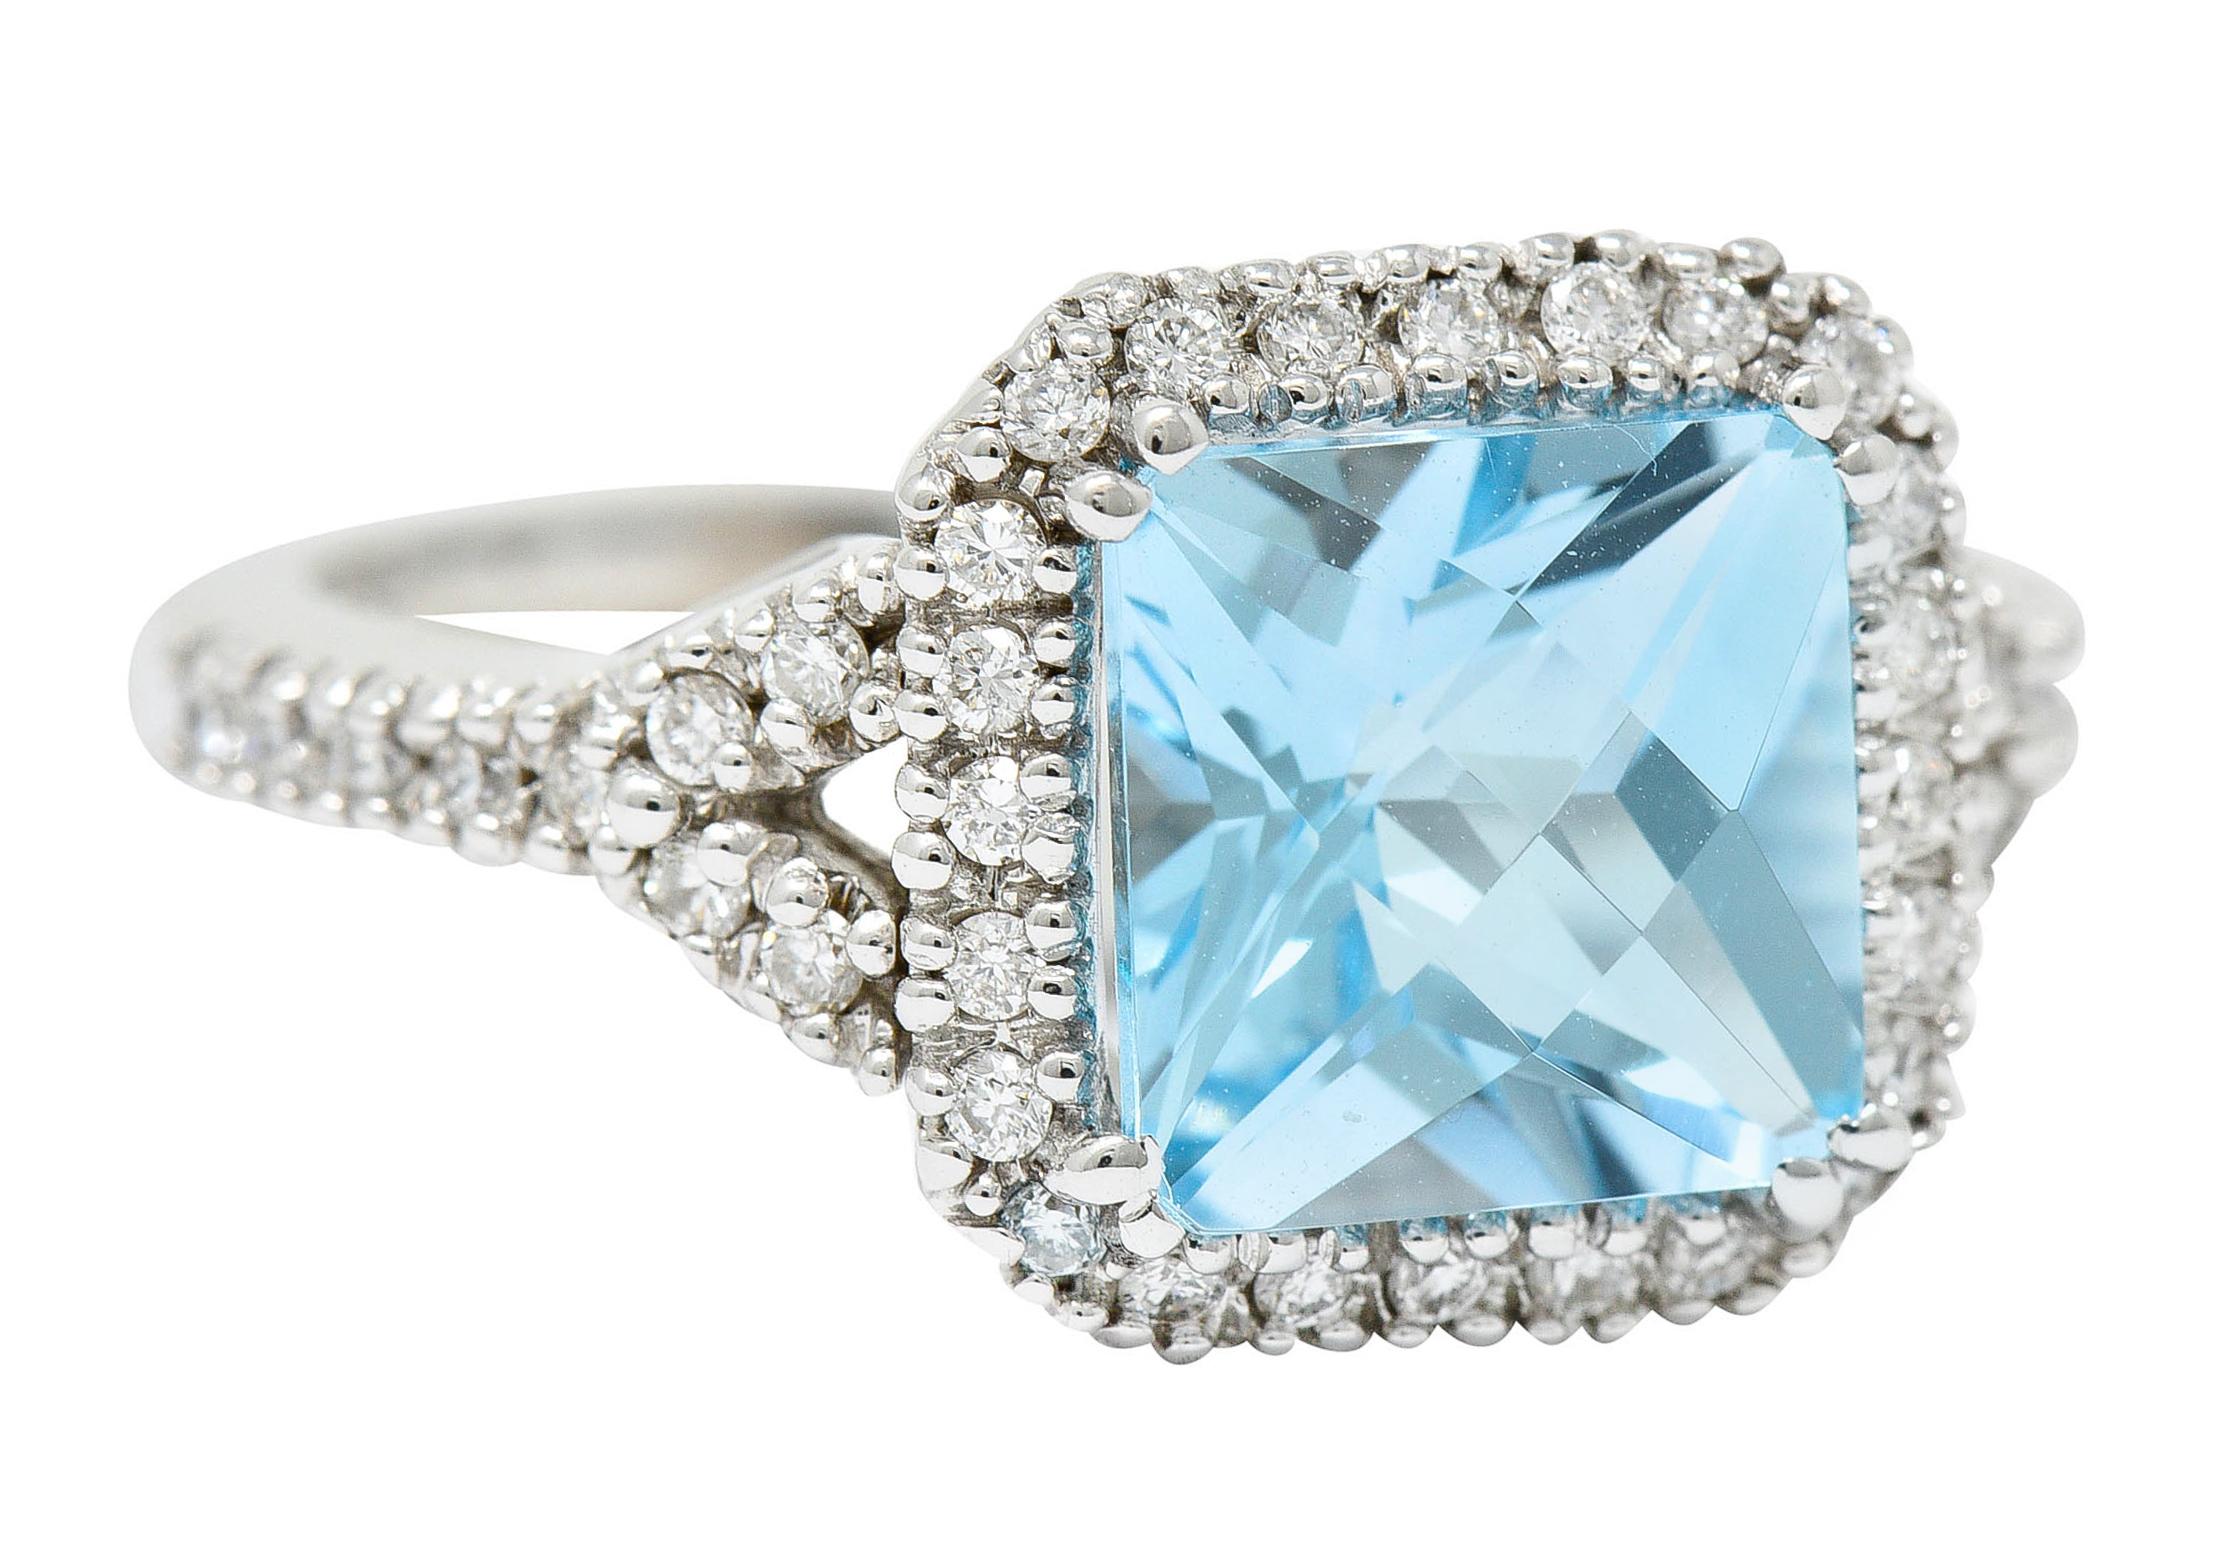 Cluster ring centers a 8.0 mm square checkerboard cut blue topaz

Transparent and grayish blue in color

Surrounded by a diamond halo and flanked by split shoulders - also diamond accented

Round brilliant cut diamonds weigh in total approximately